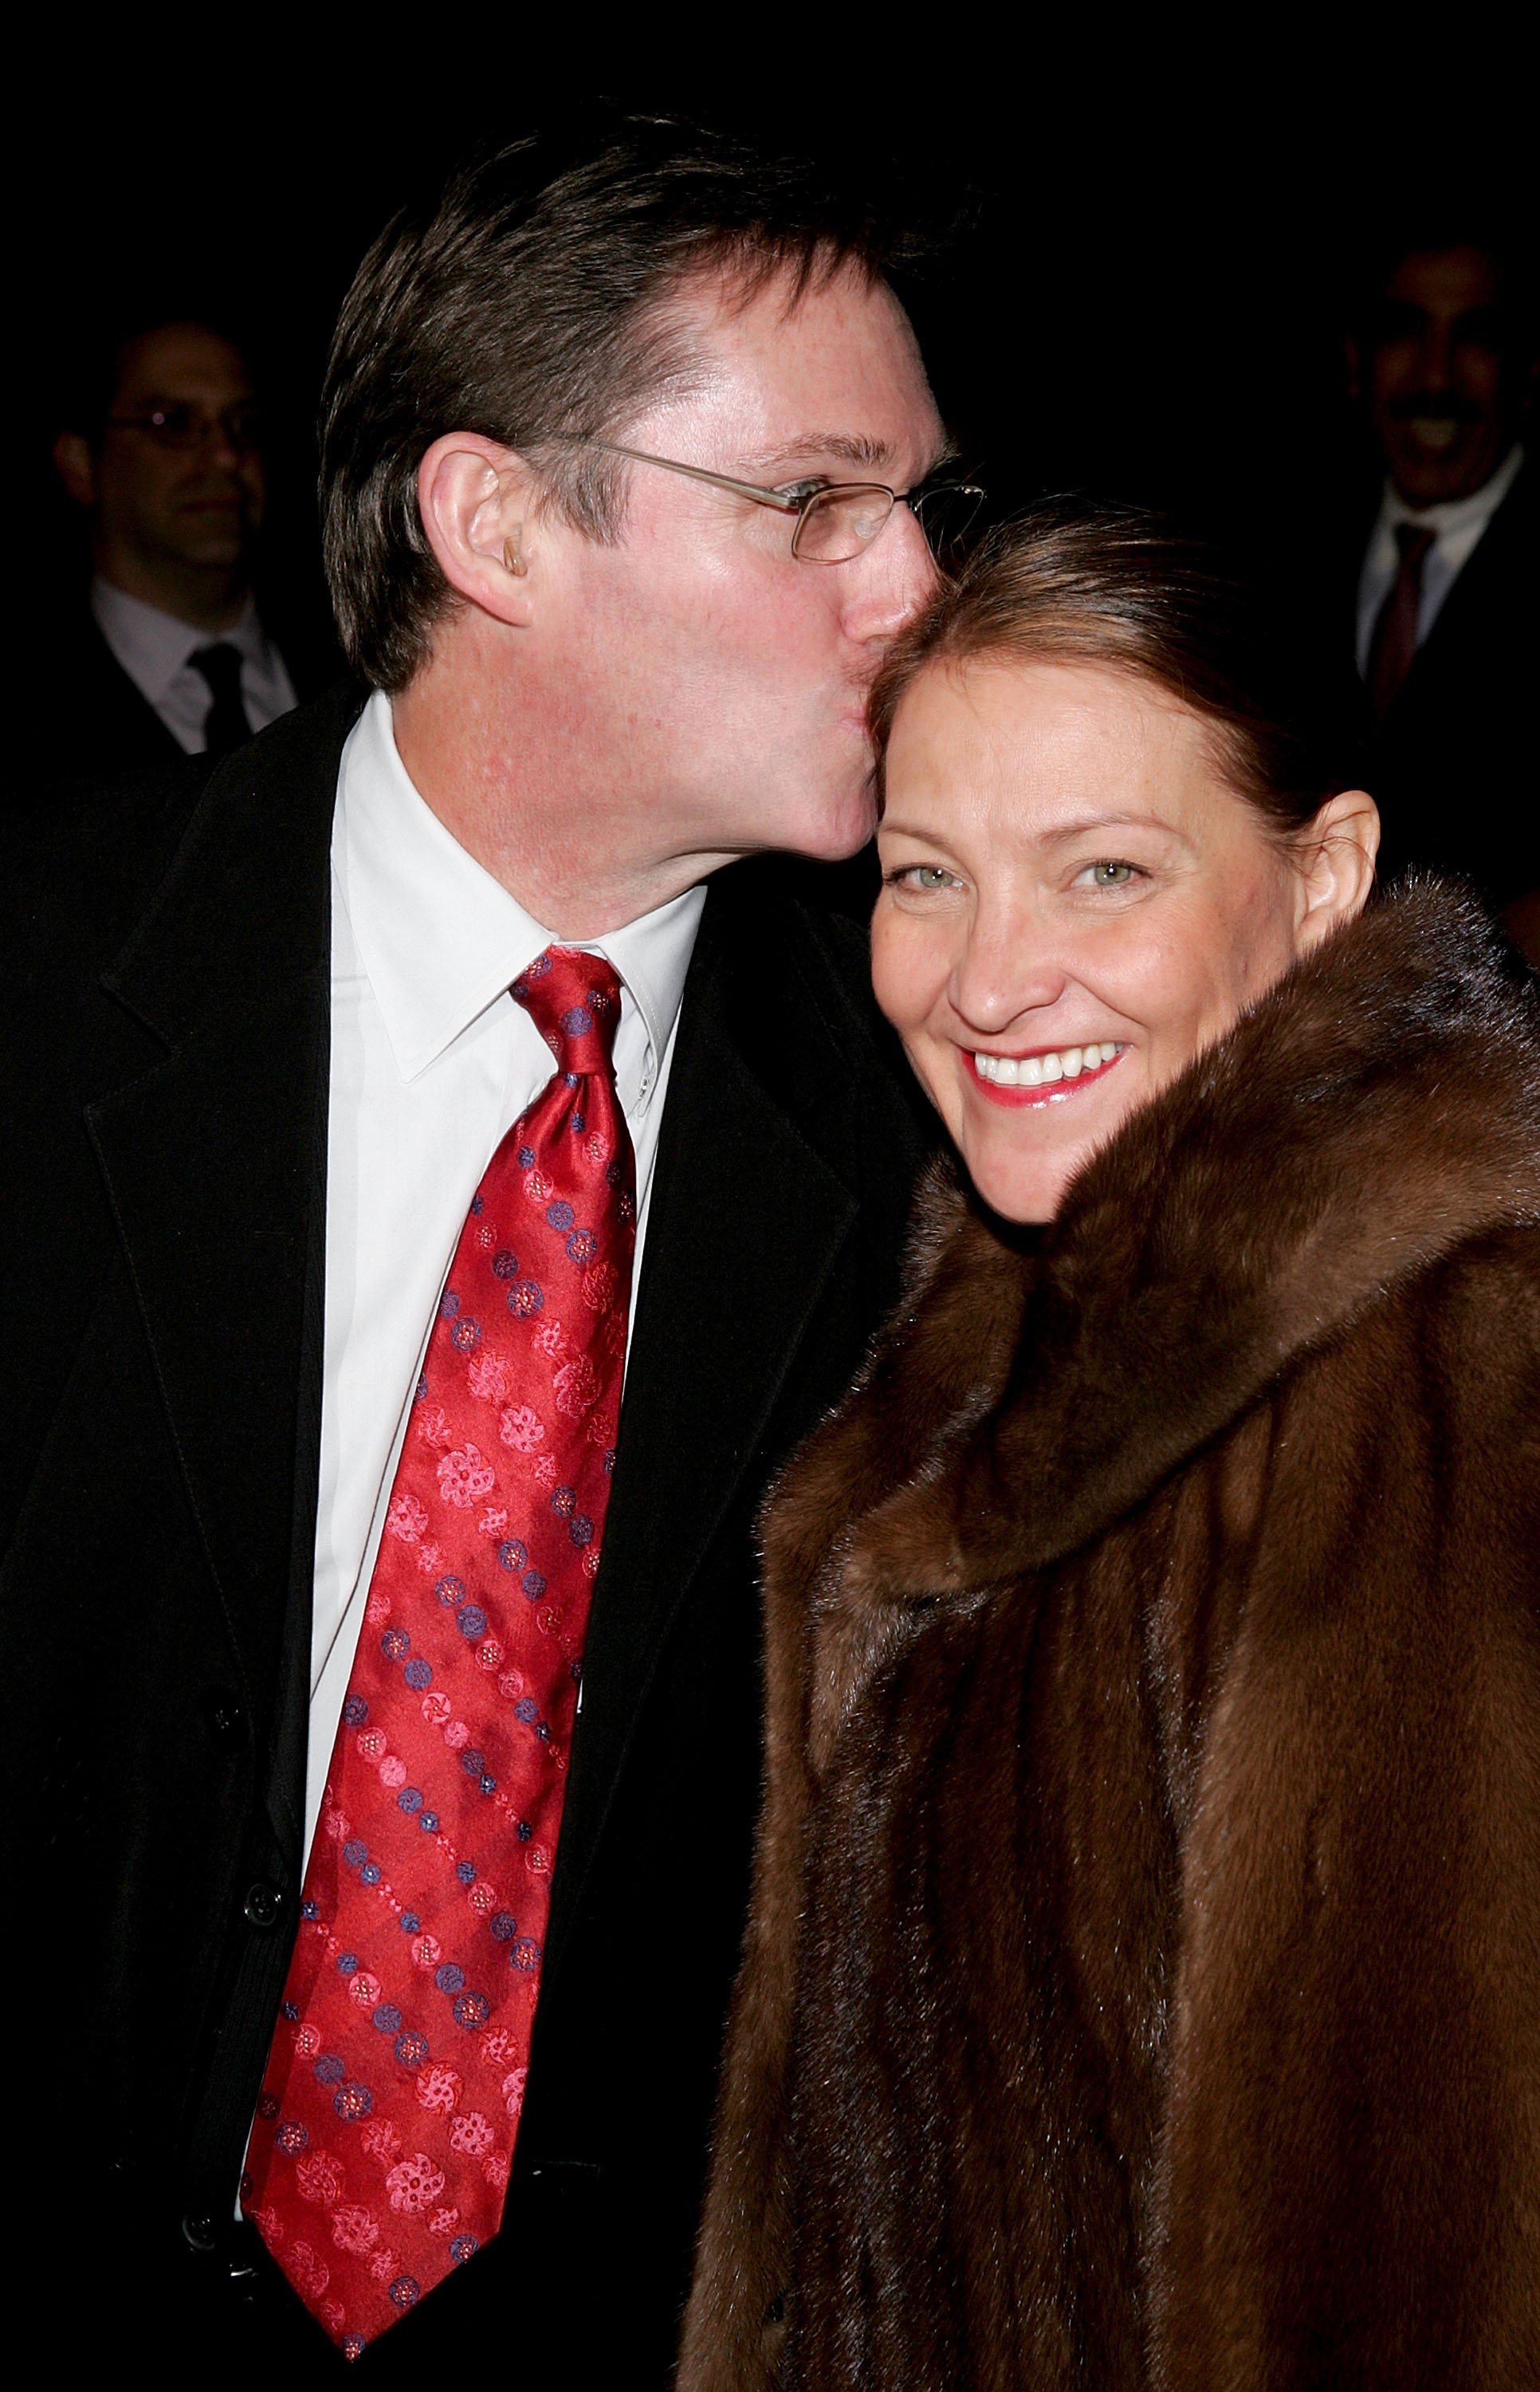 Richard Thomas and his wife Georgiana Bischoff attends the opening night of "Entertaining Mr. Sloane" at Roundabout's Laura Pels Theatre March 16, 2006 in New York City | Source: Getty Images